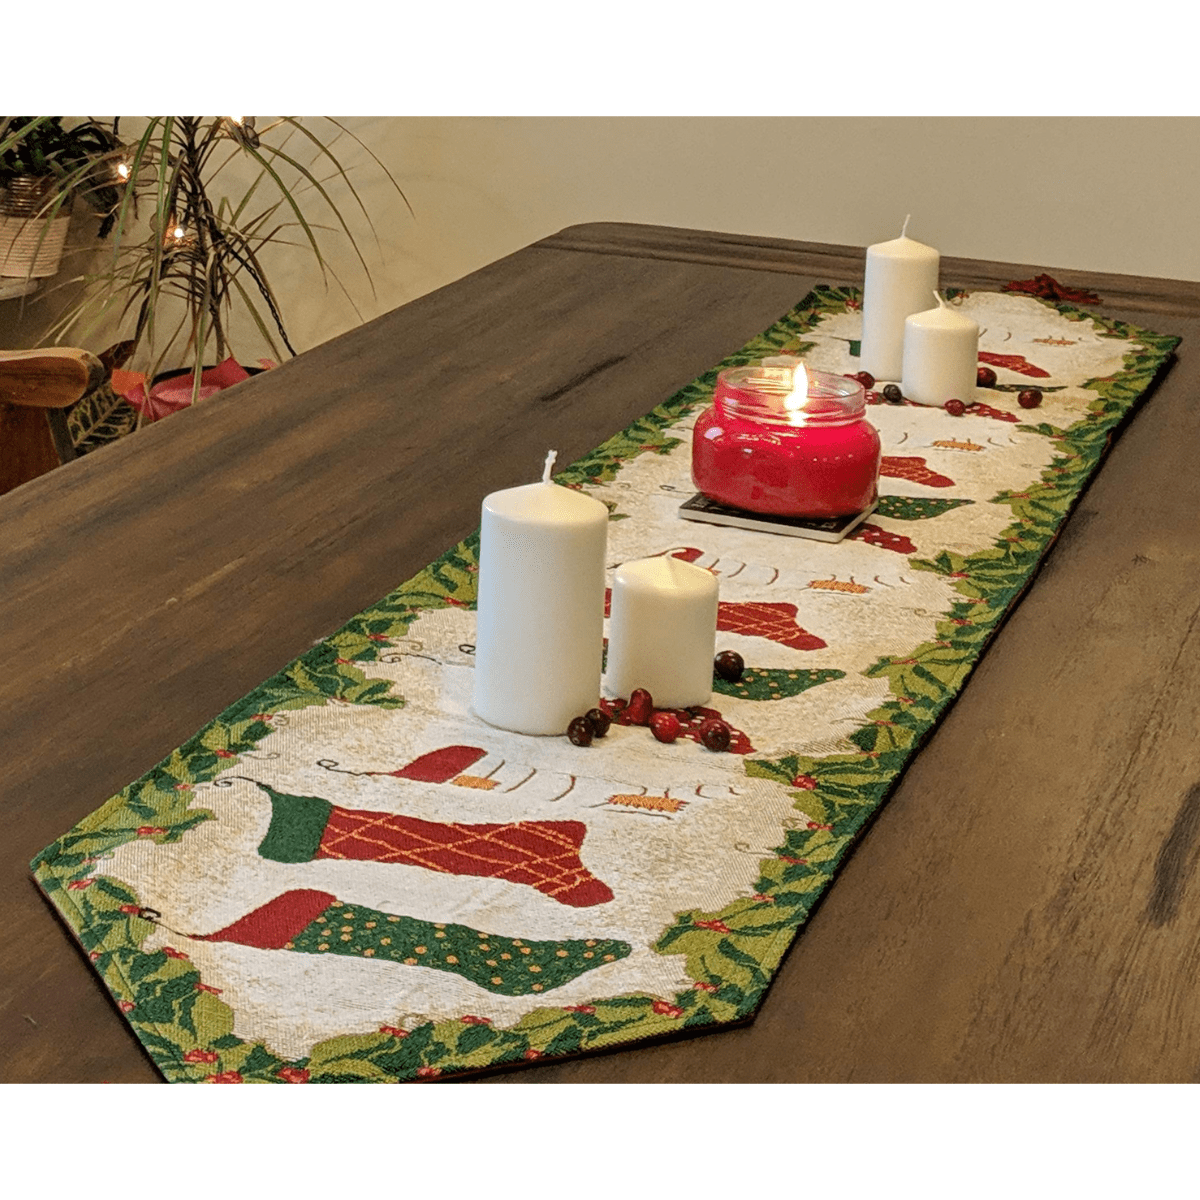 Tache Hang My Stockings By the Fireplace Table Runners (12910) - Tache Home Fashion